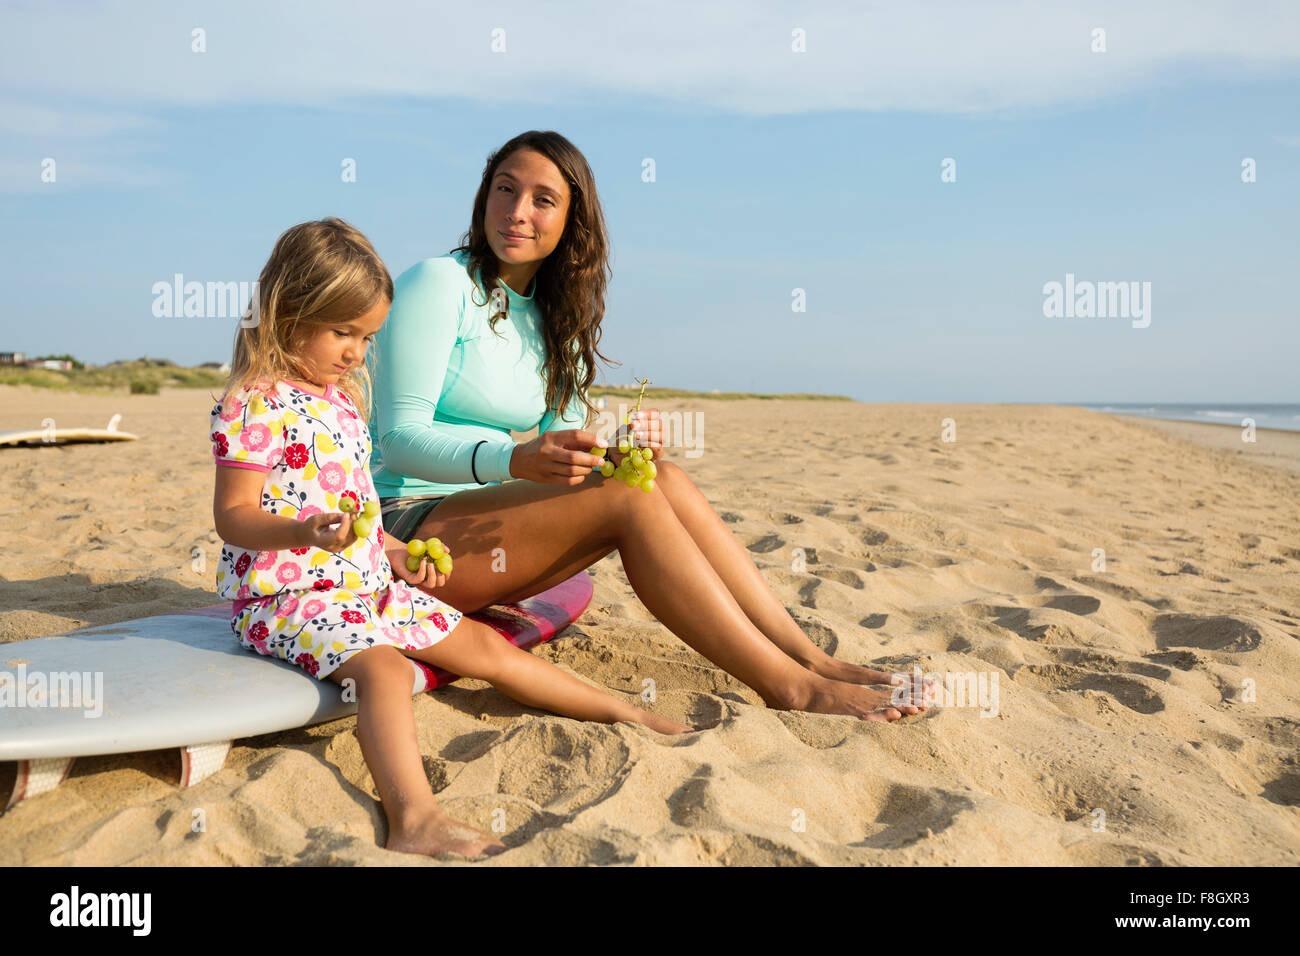 Mother and Daughter eating grapes on beach Banque D'Images